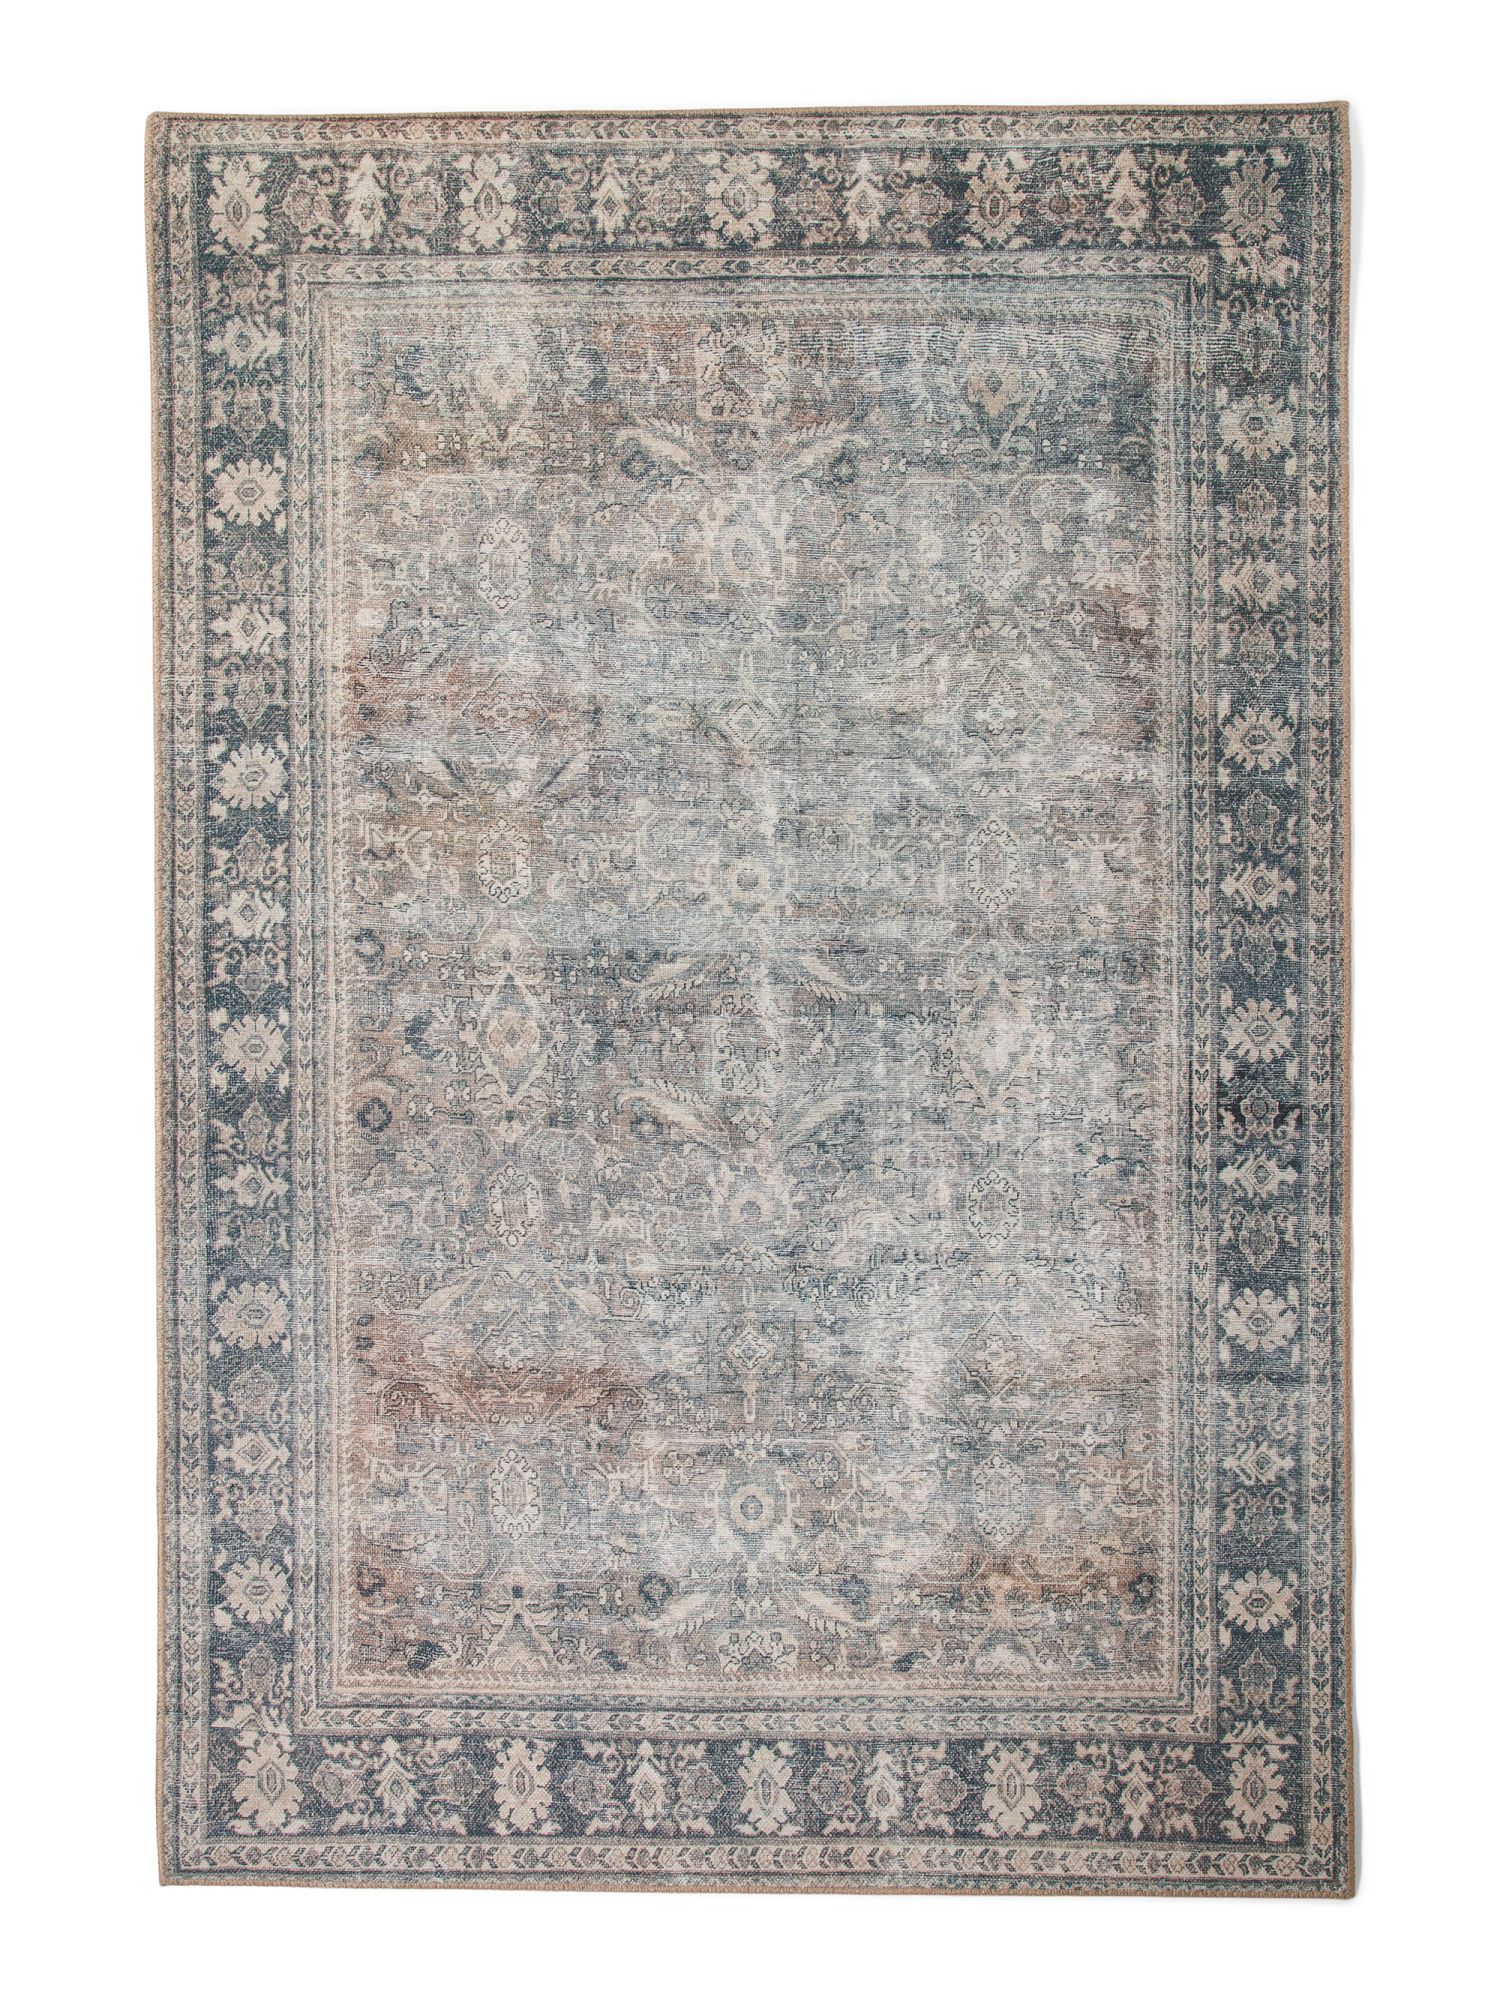 Made In Egypt 5x7 Area Rug | Marshalls